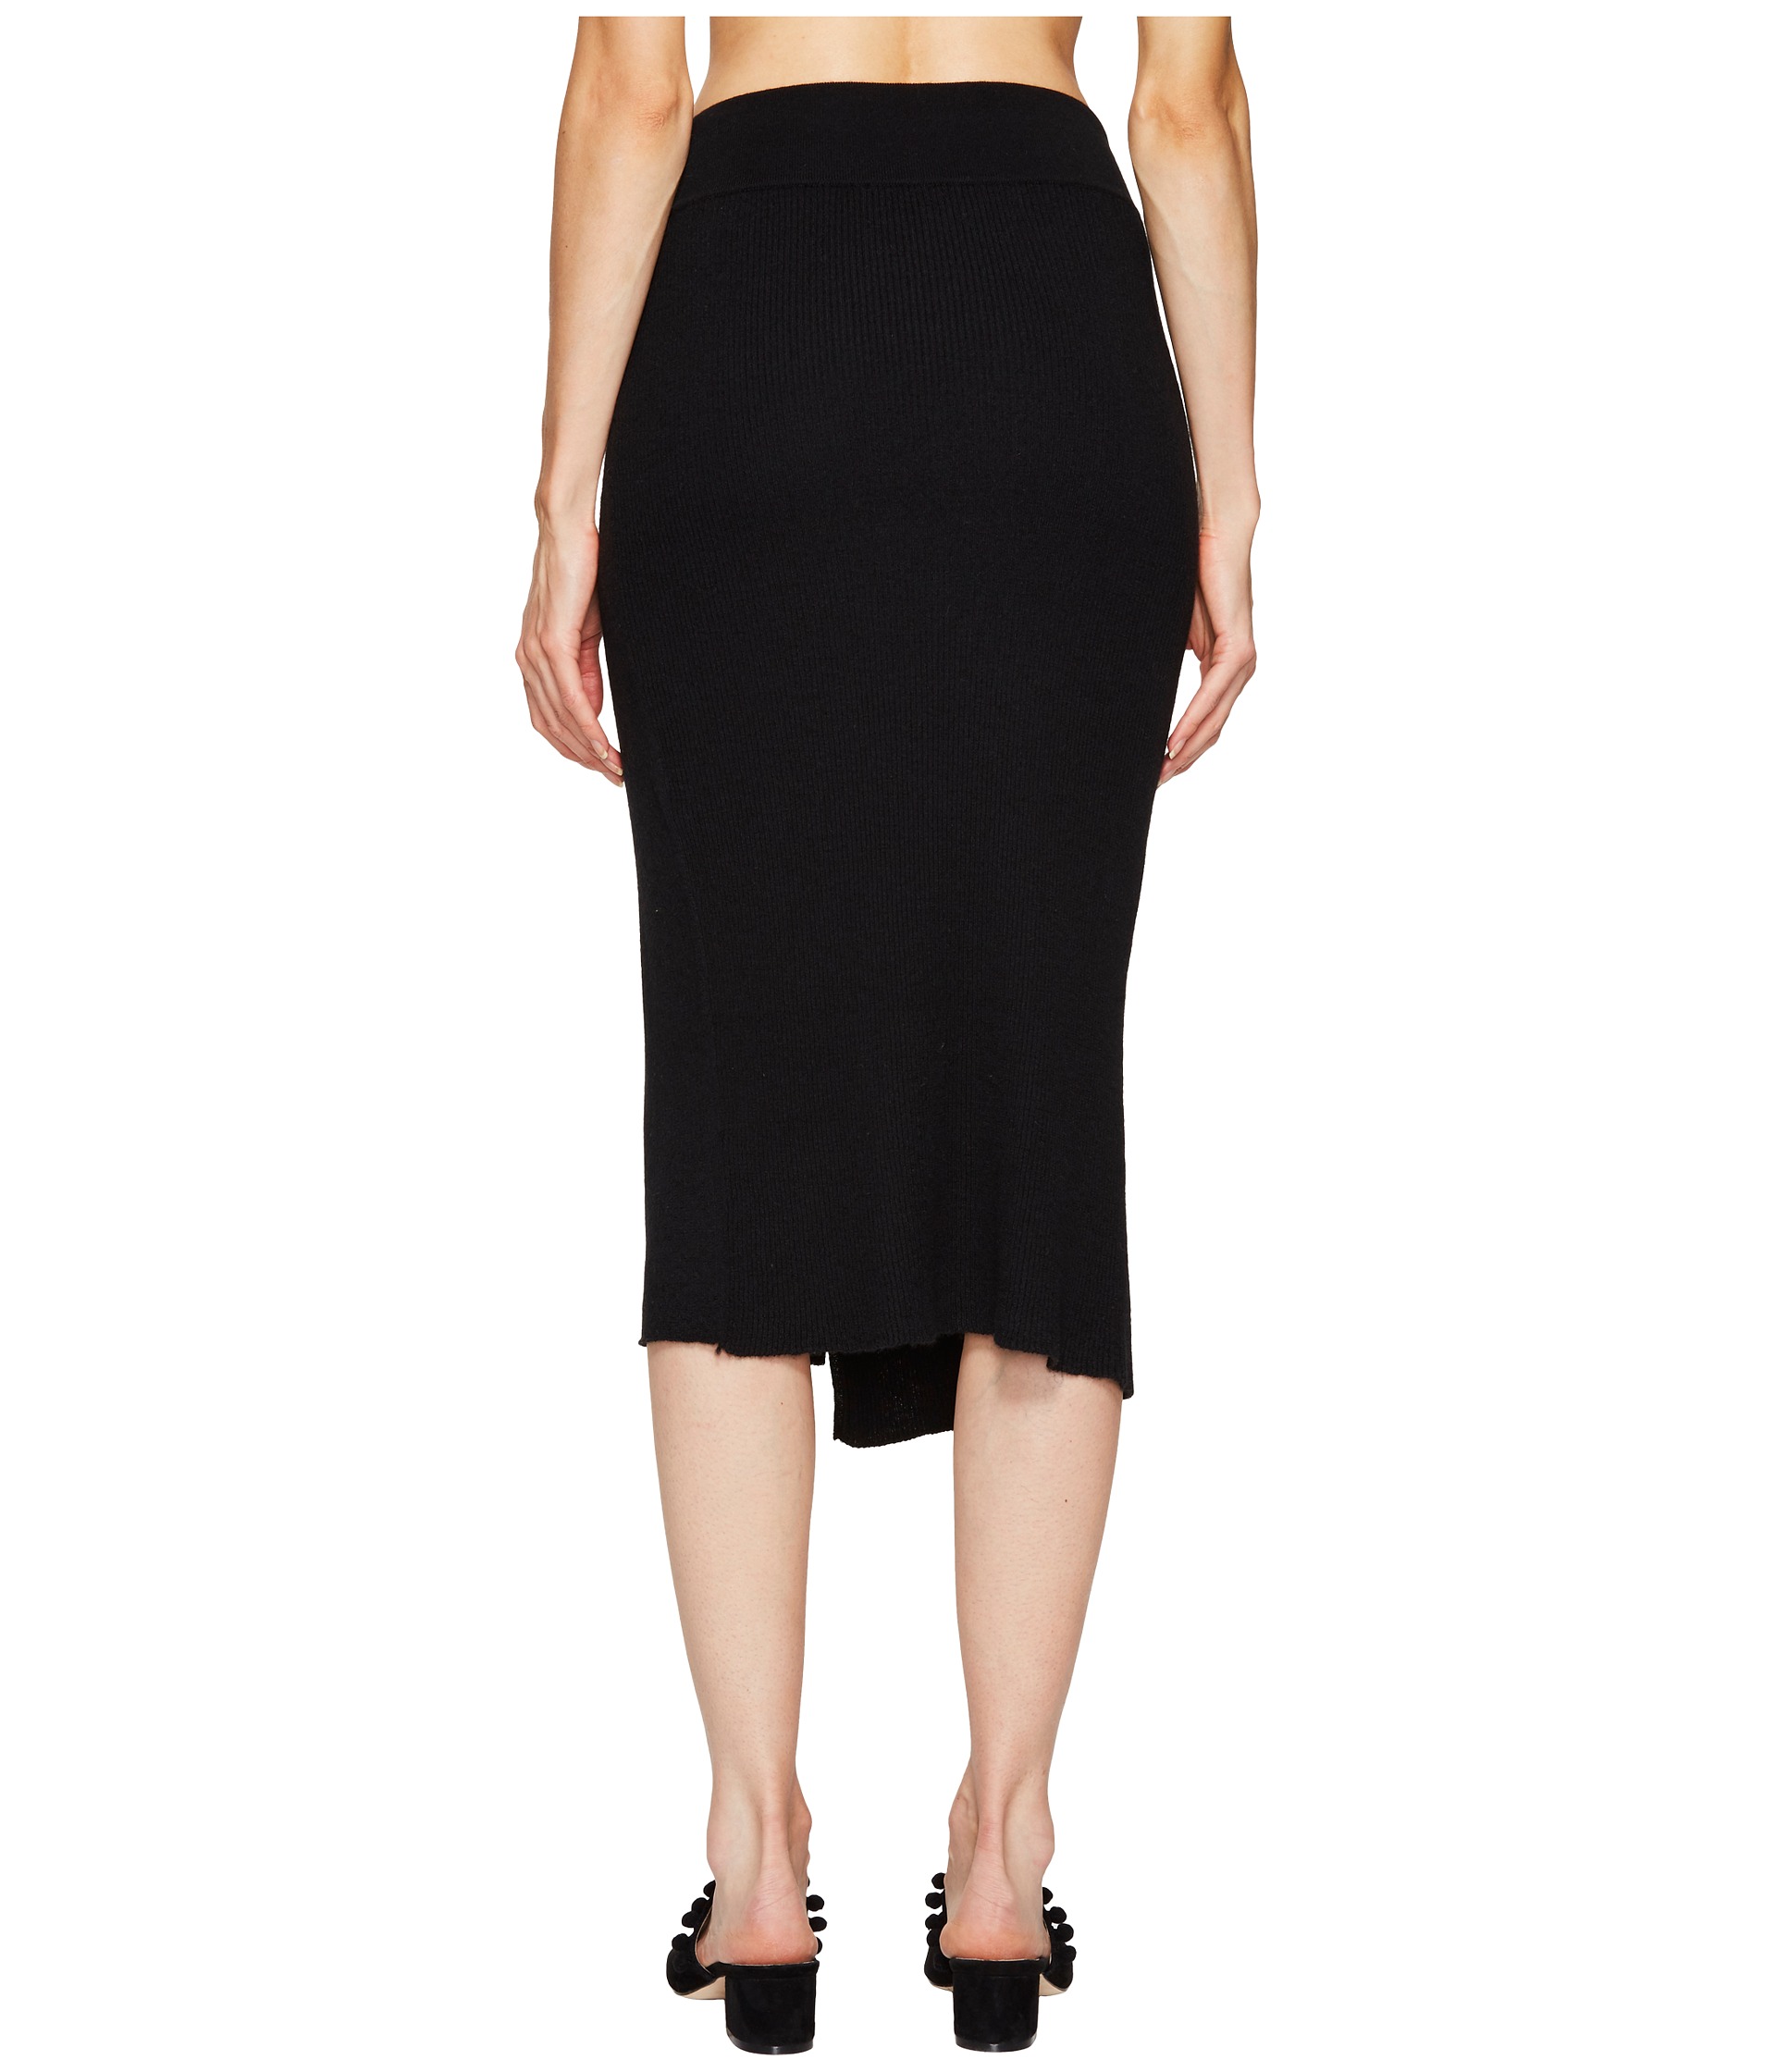 Cashmere In Love Capri Ribbed Knit Skirt at Zappos.com